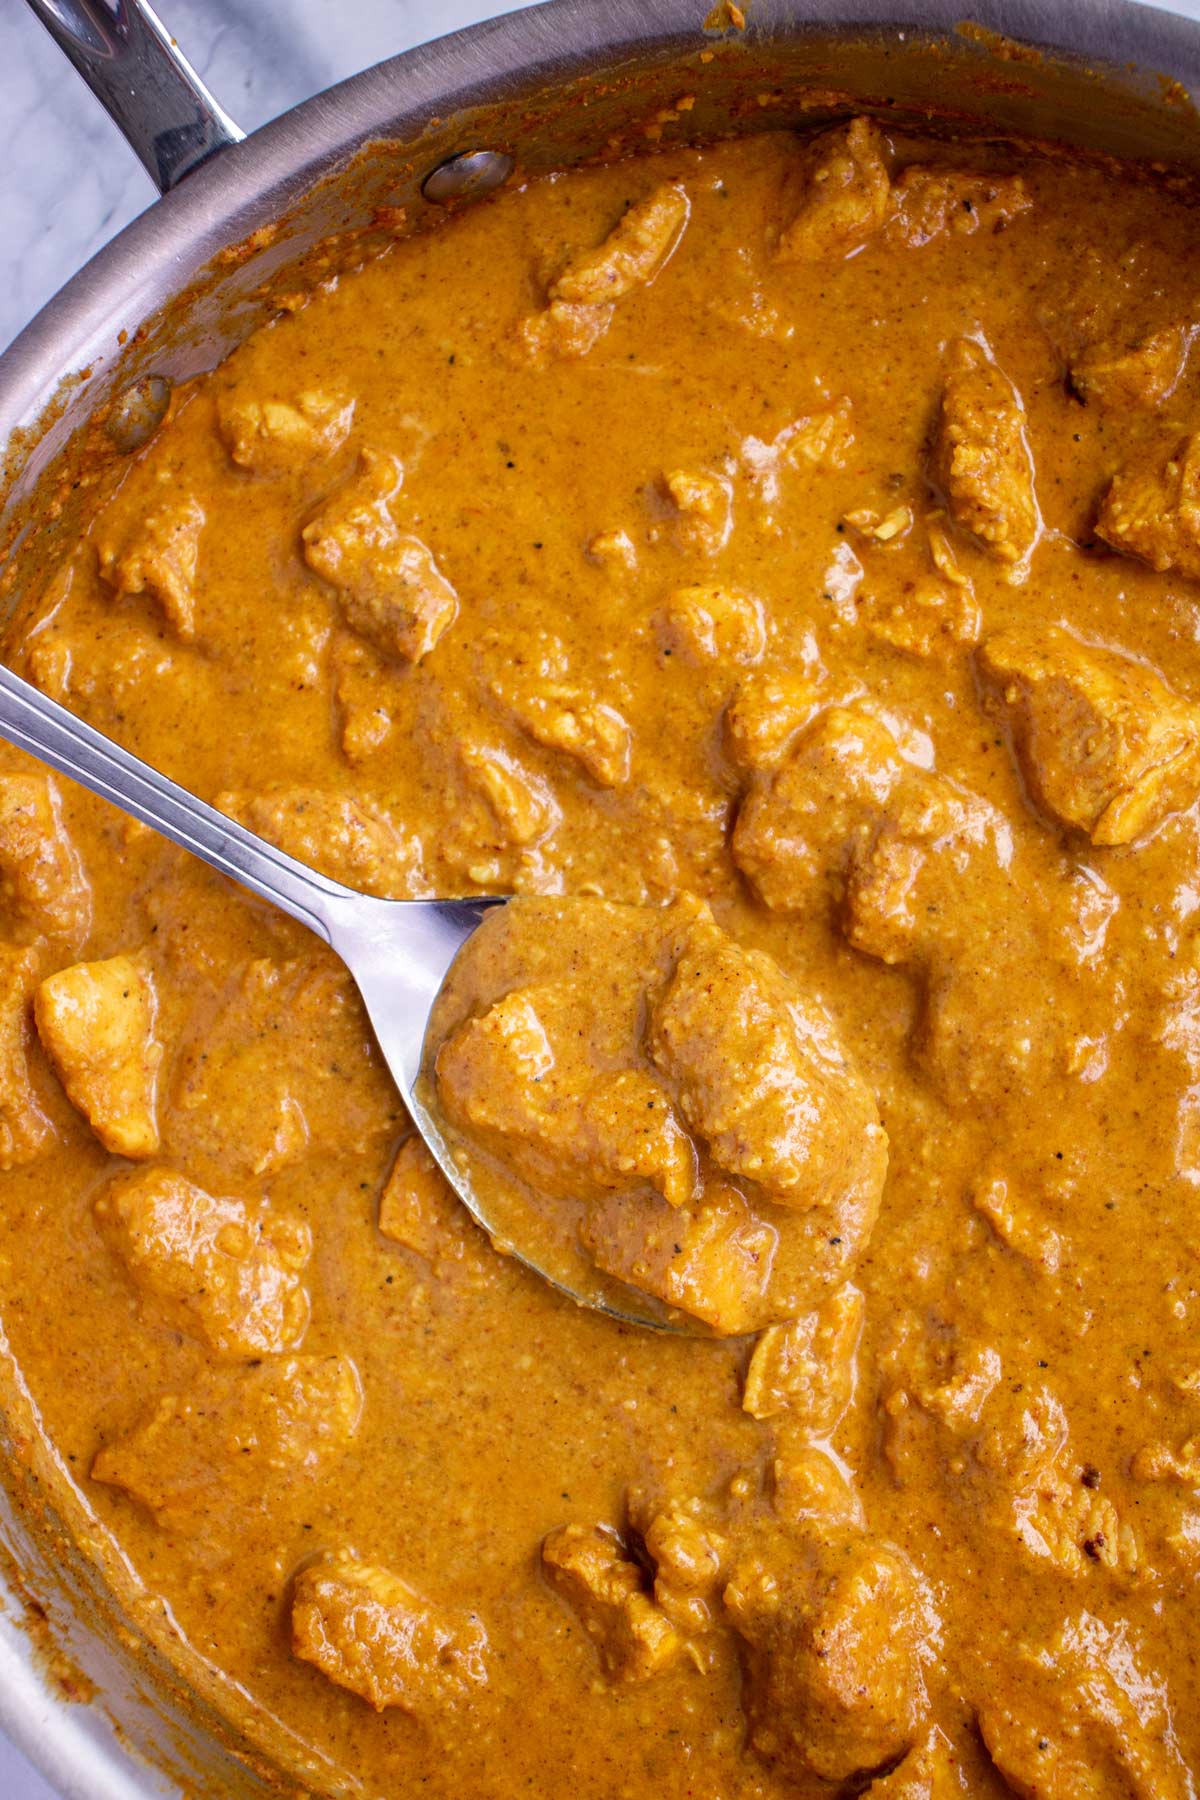 A stainless steel skillet of chicken korma curry with a large metal spoon scooping some up.